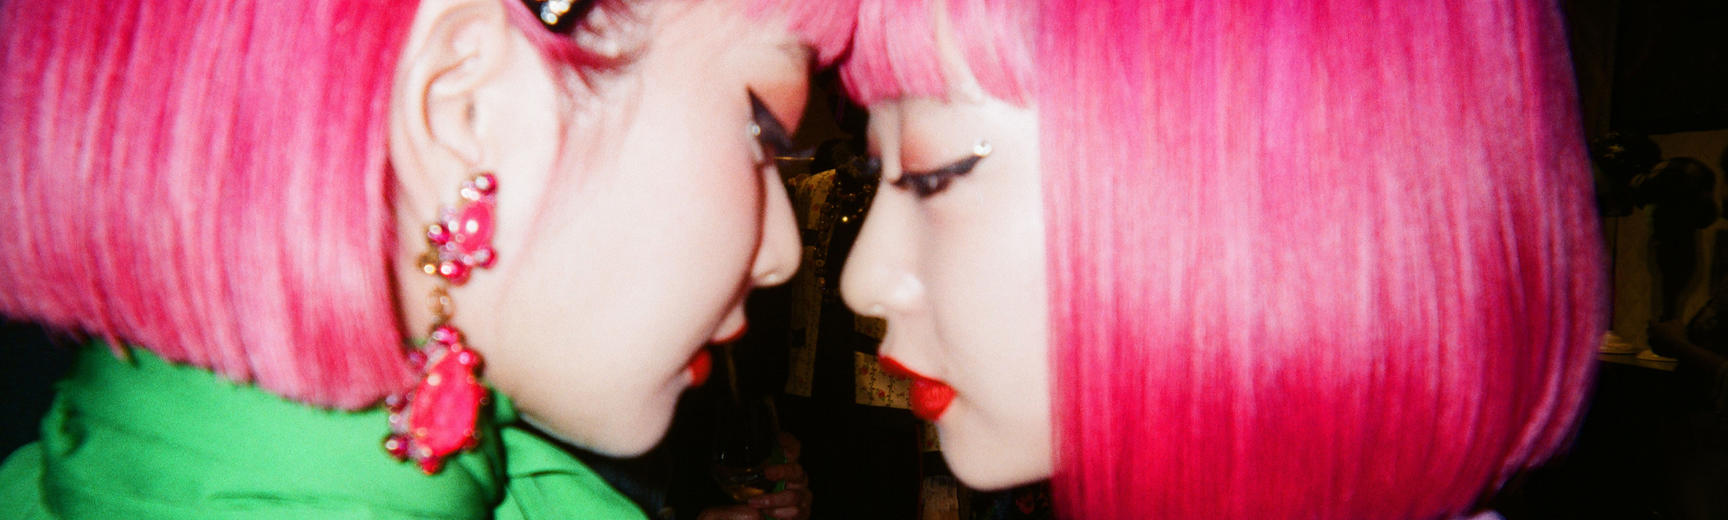 Photograph by Ninagawa Mika of two pink-haired young women facing each other